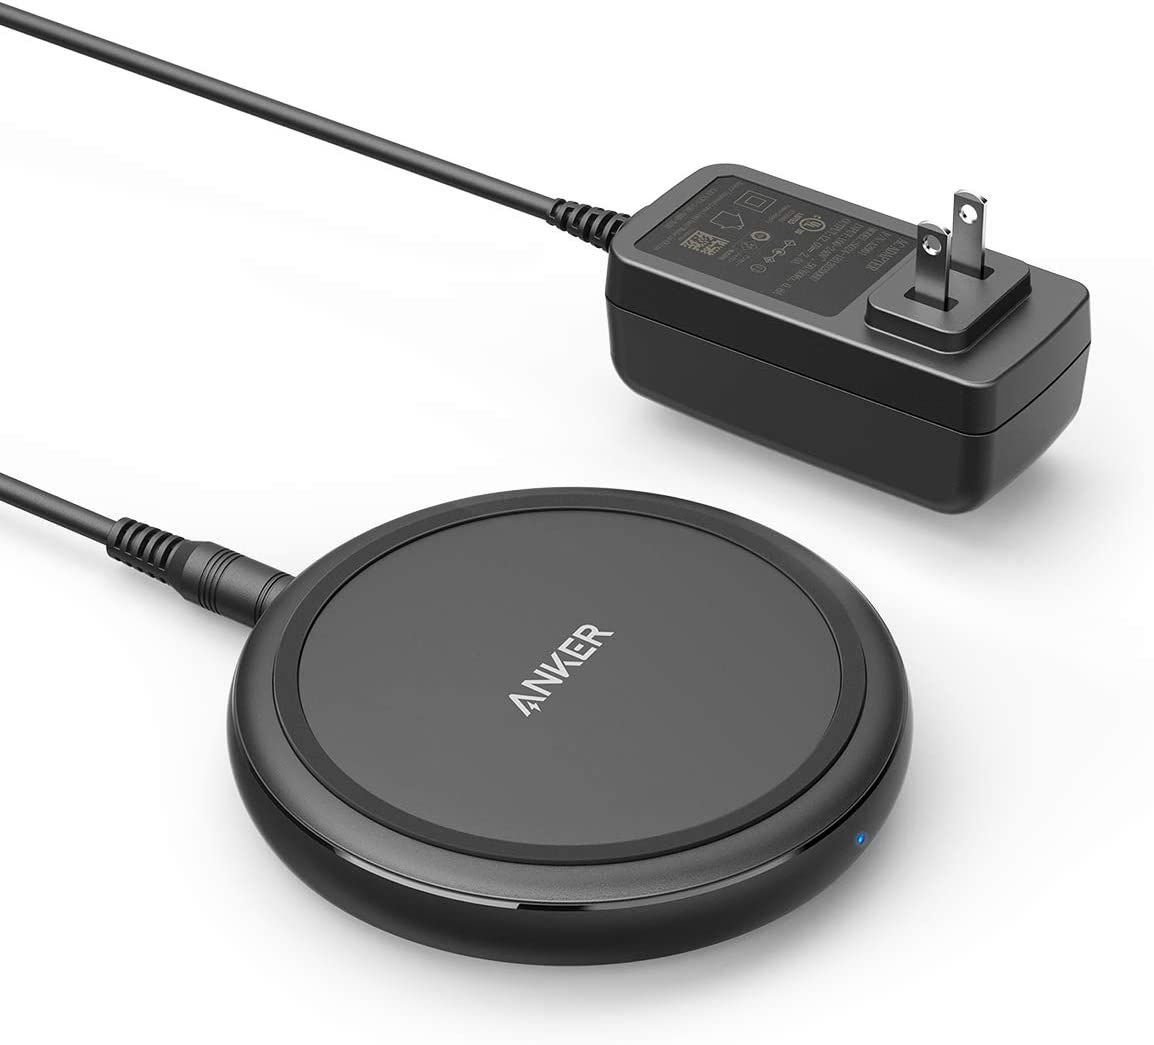 If an official wireless charger is too pricey for you, the Anker PowerWave II charger can help.  It supports wireless charging at up to 15W, so you'll get maximum speed.  Plus, it comes with a power adapter, so you don't have to worry about finding an AC adapter.